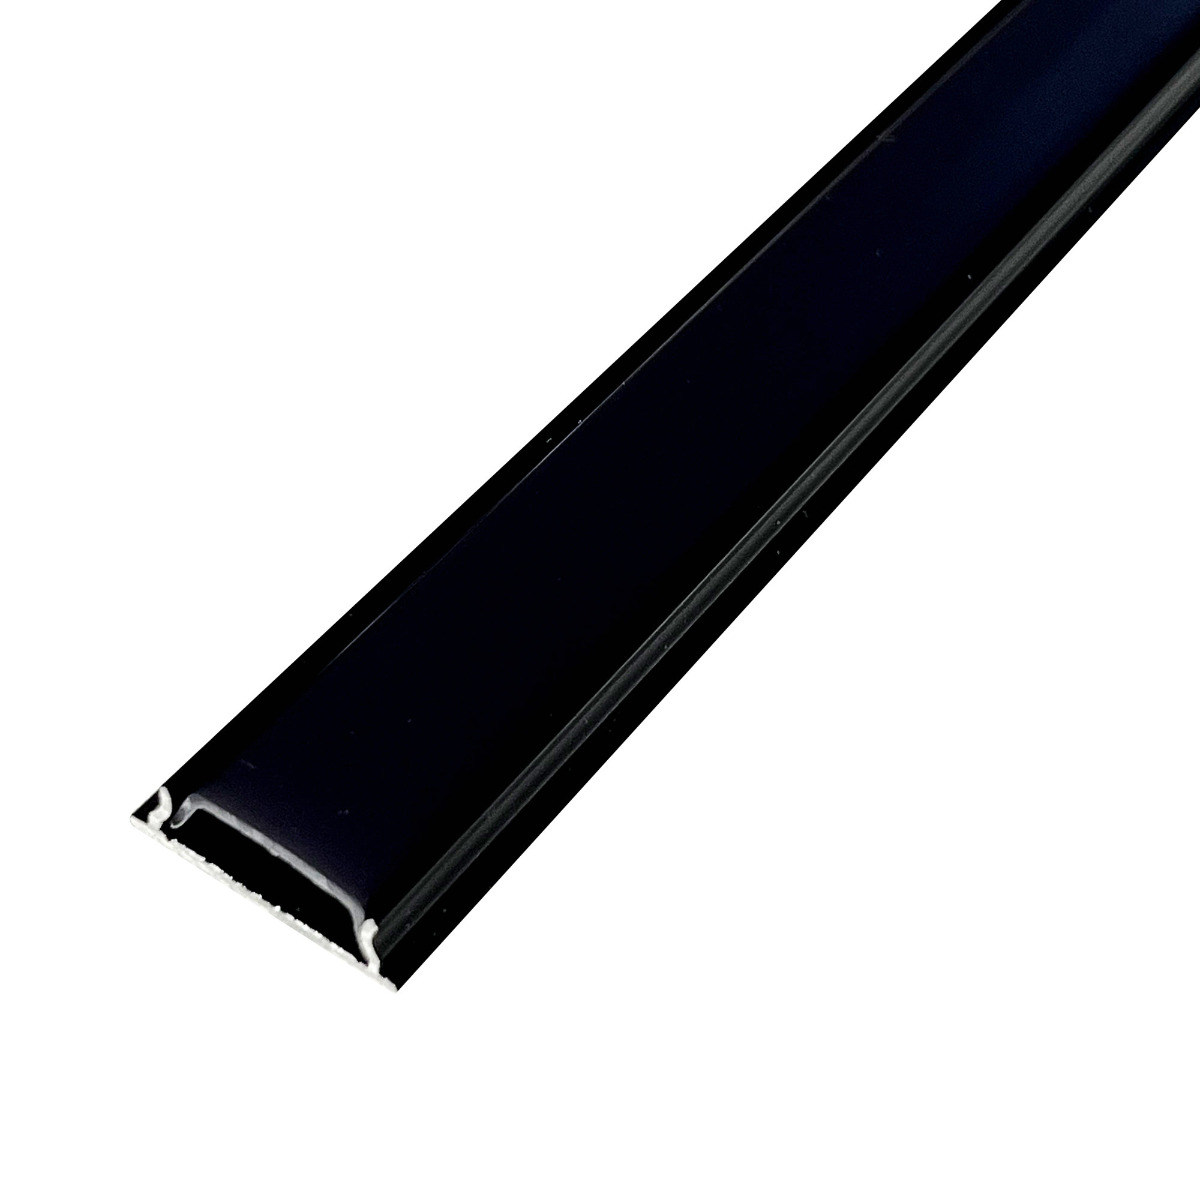 View 2m Bendable Black Aluminium Profile With Black Cover information